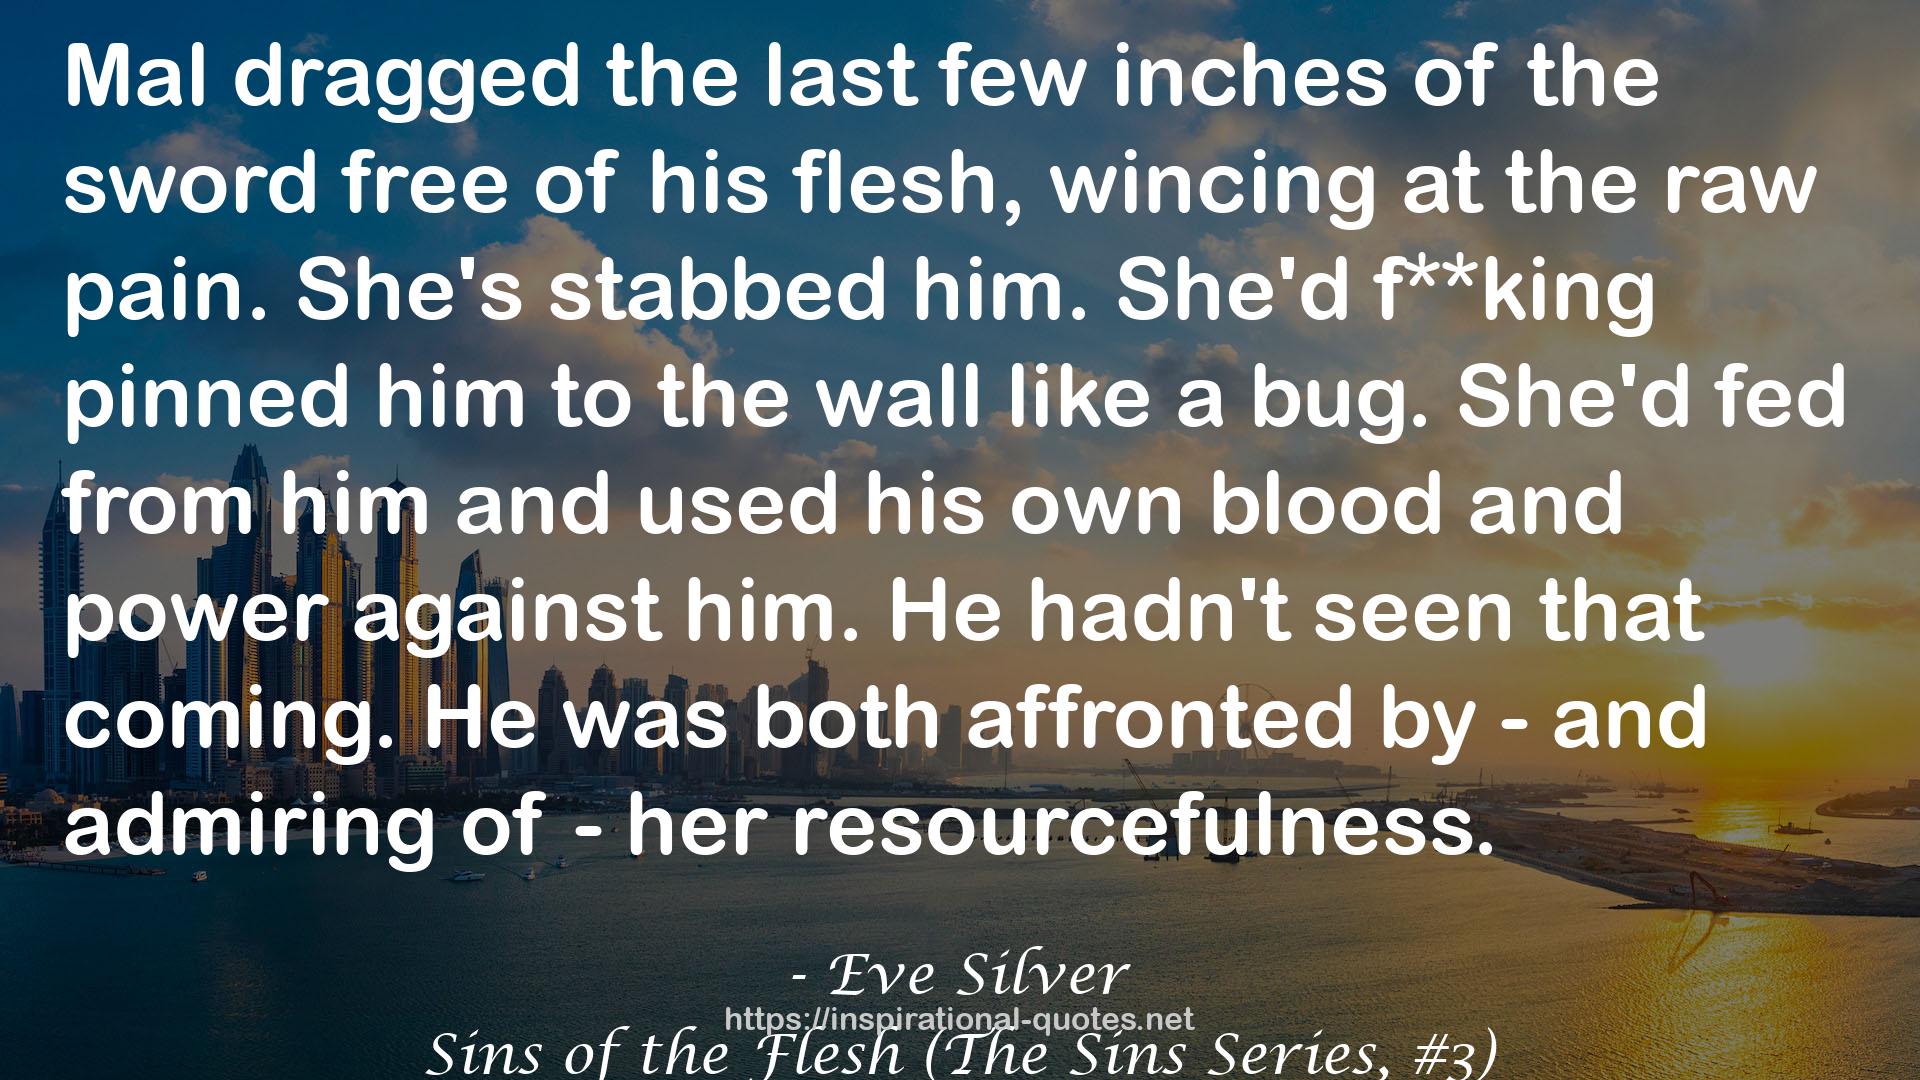 Sins of the Flesh (The Sins Series, #3) QUOTES